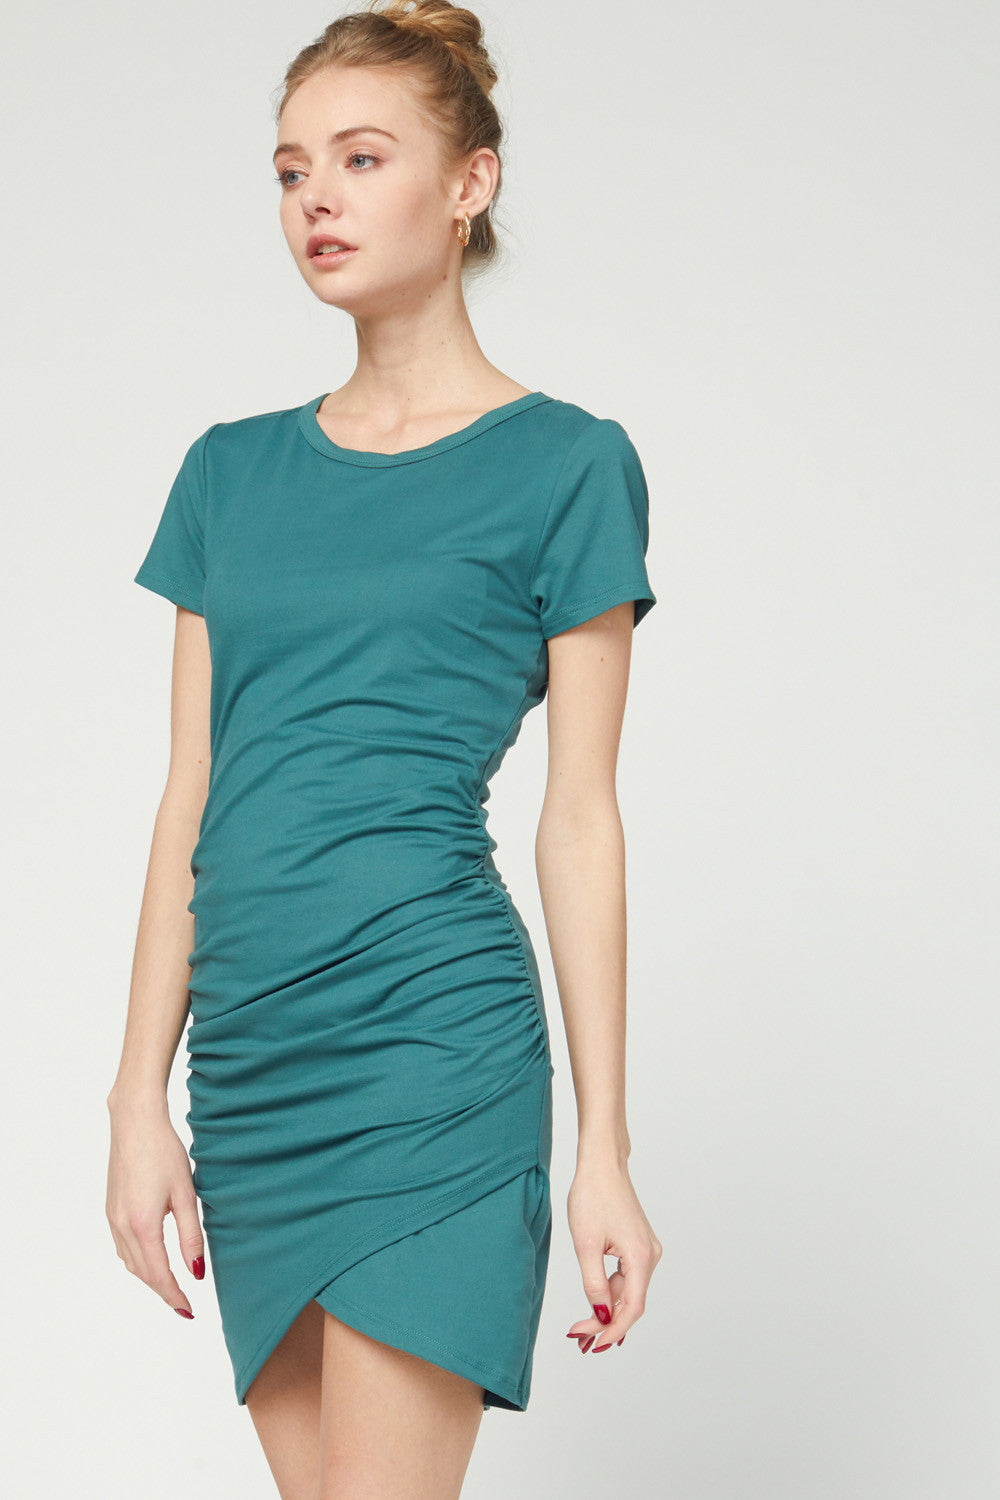 Green Short Sleeve Ruched Body-Con Dress